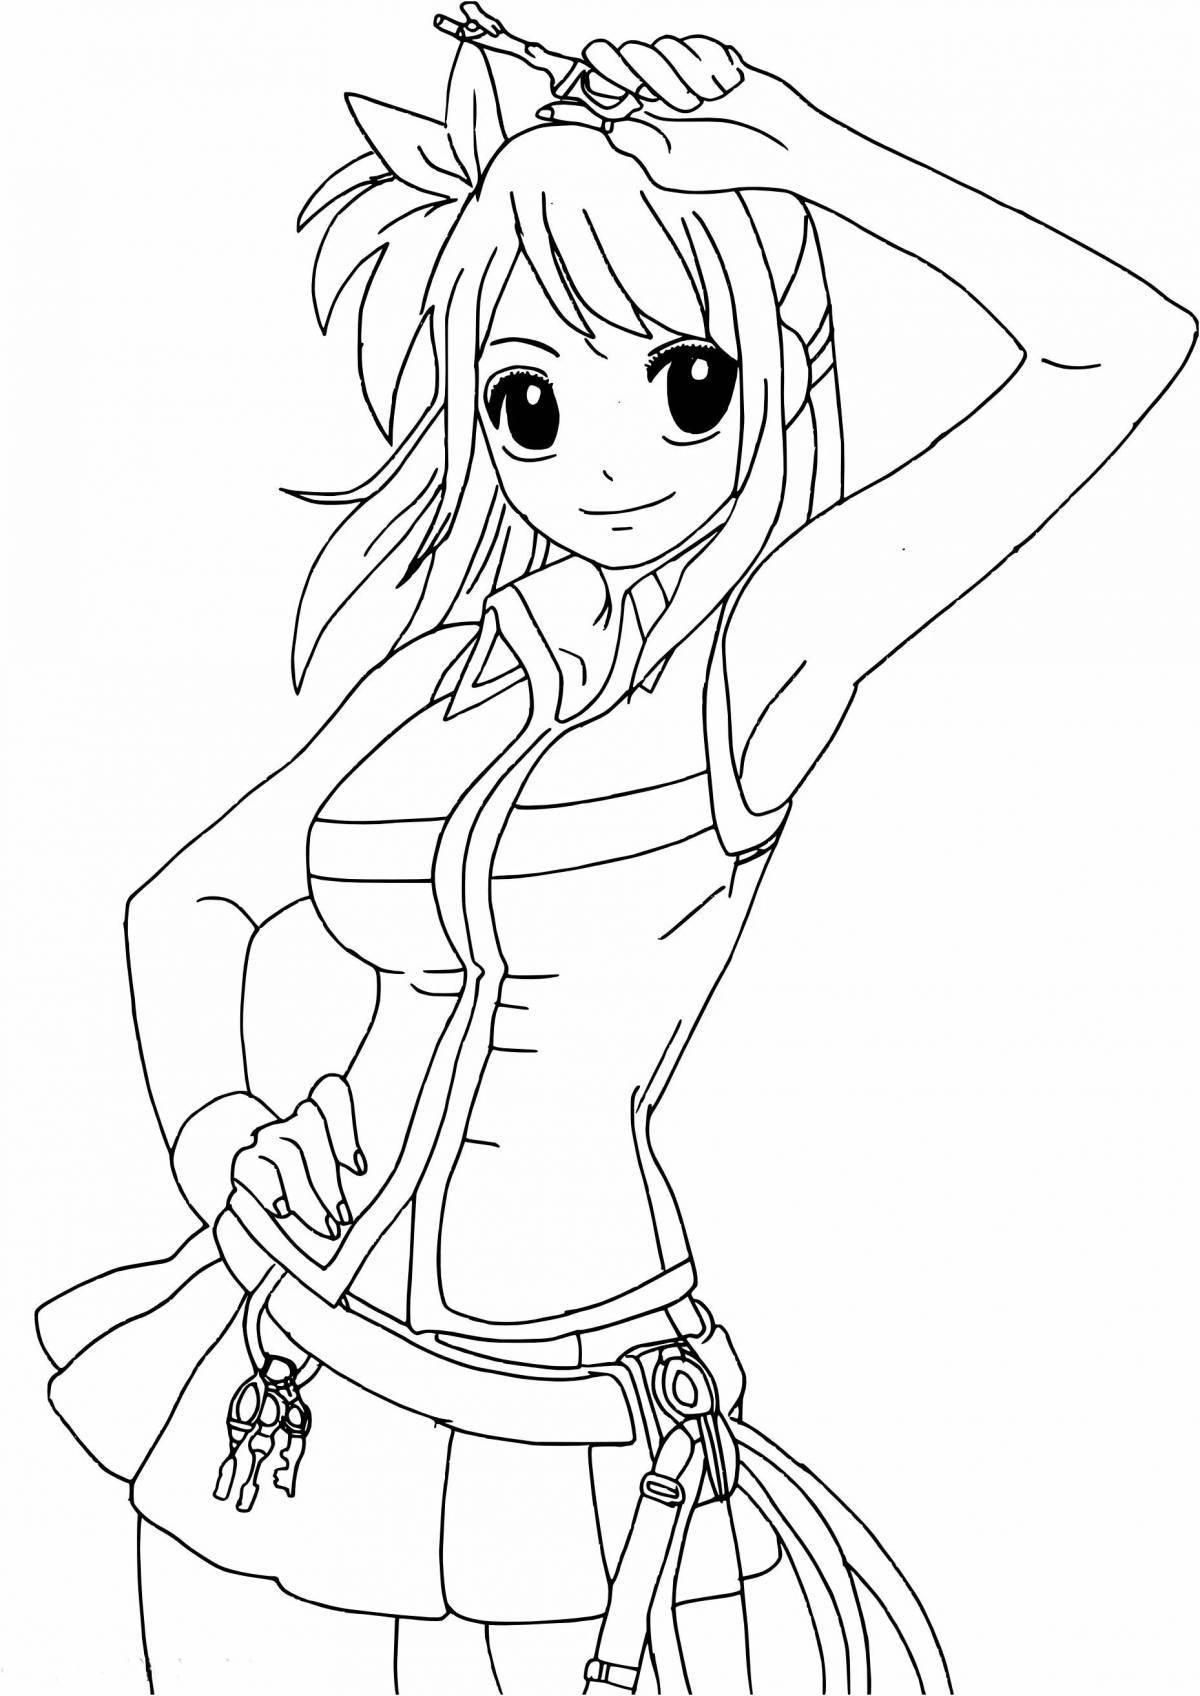 Exciting lucy coloring page